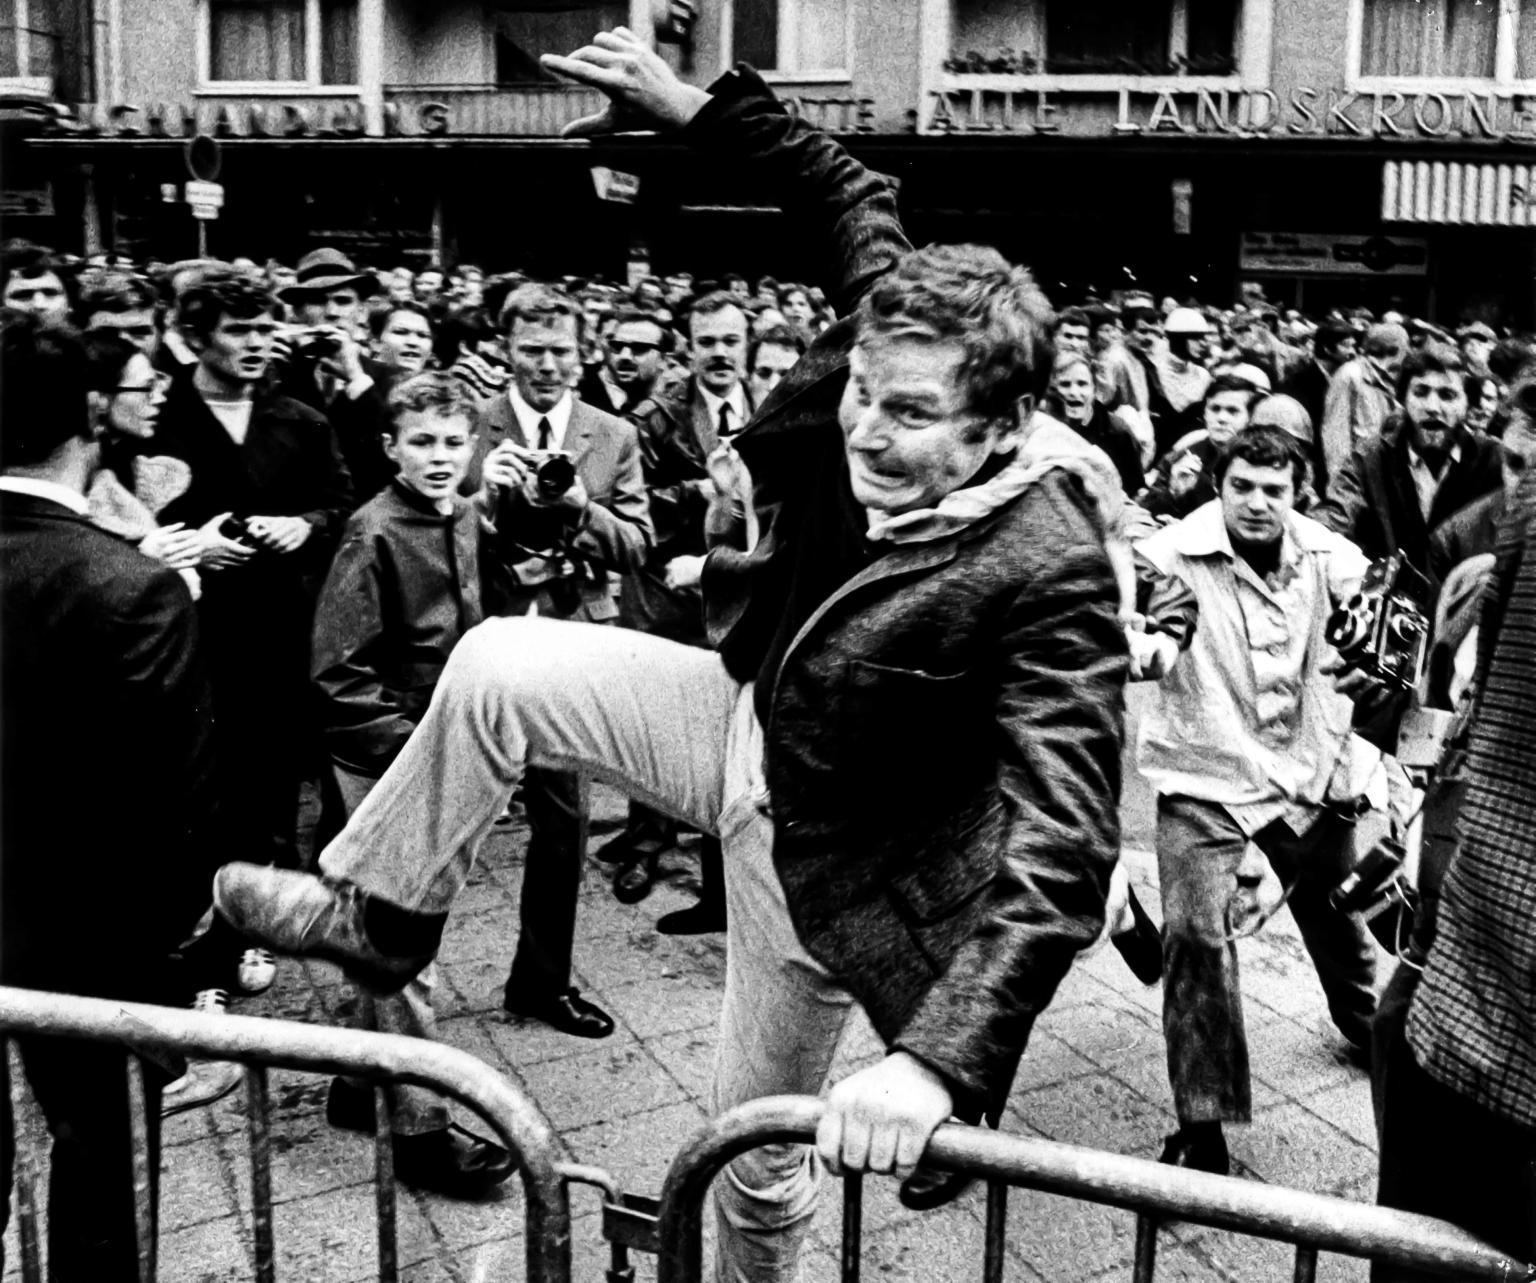 Photograph of a man jumping barricade in front of crowd of people.